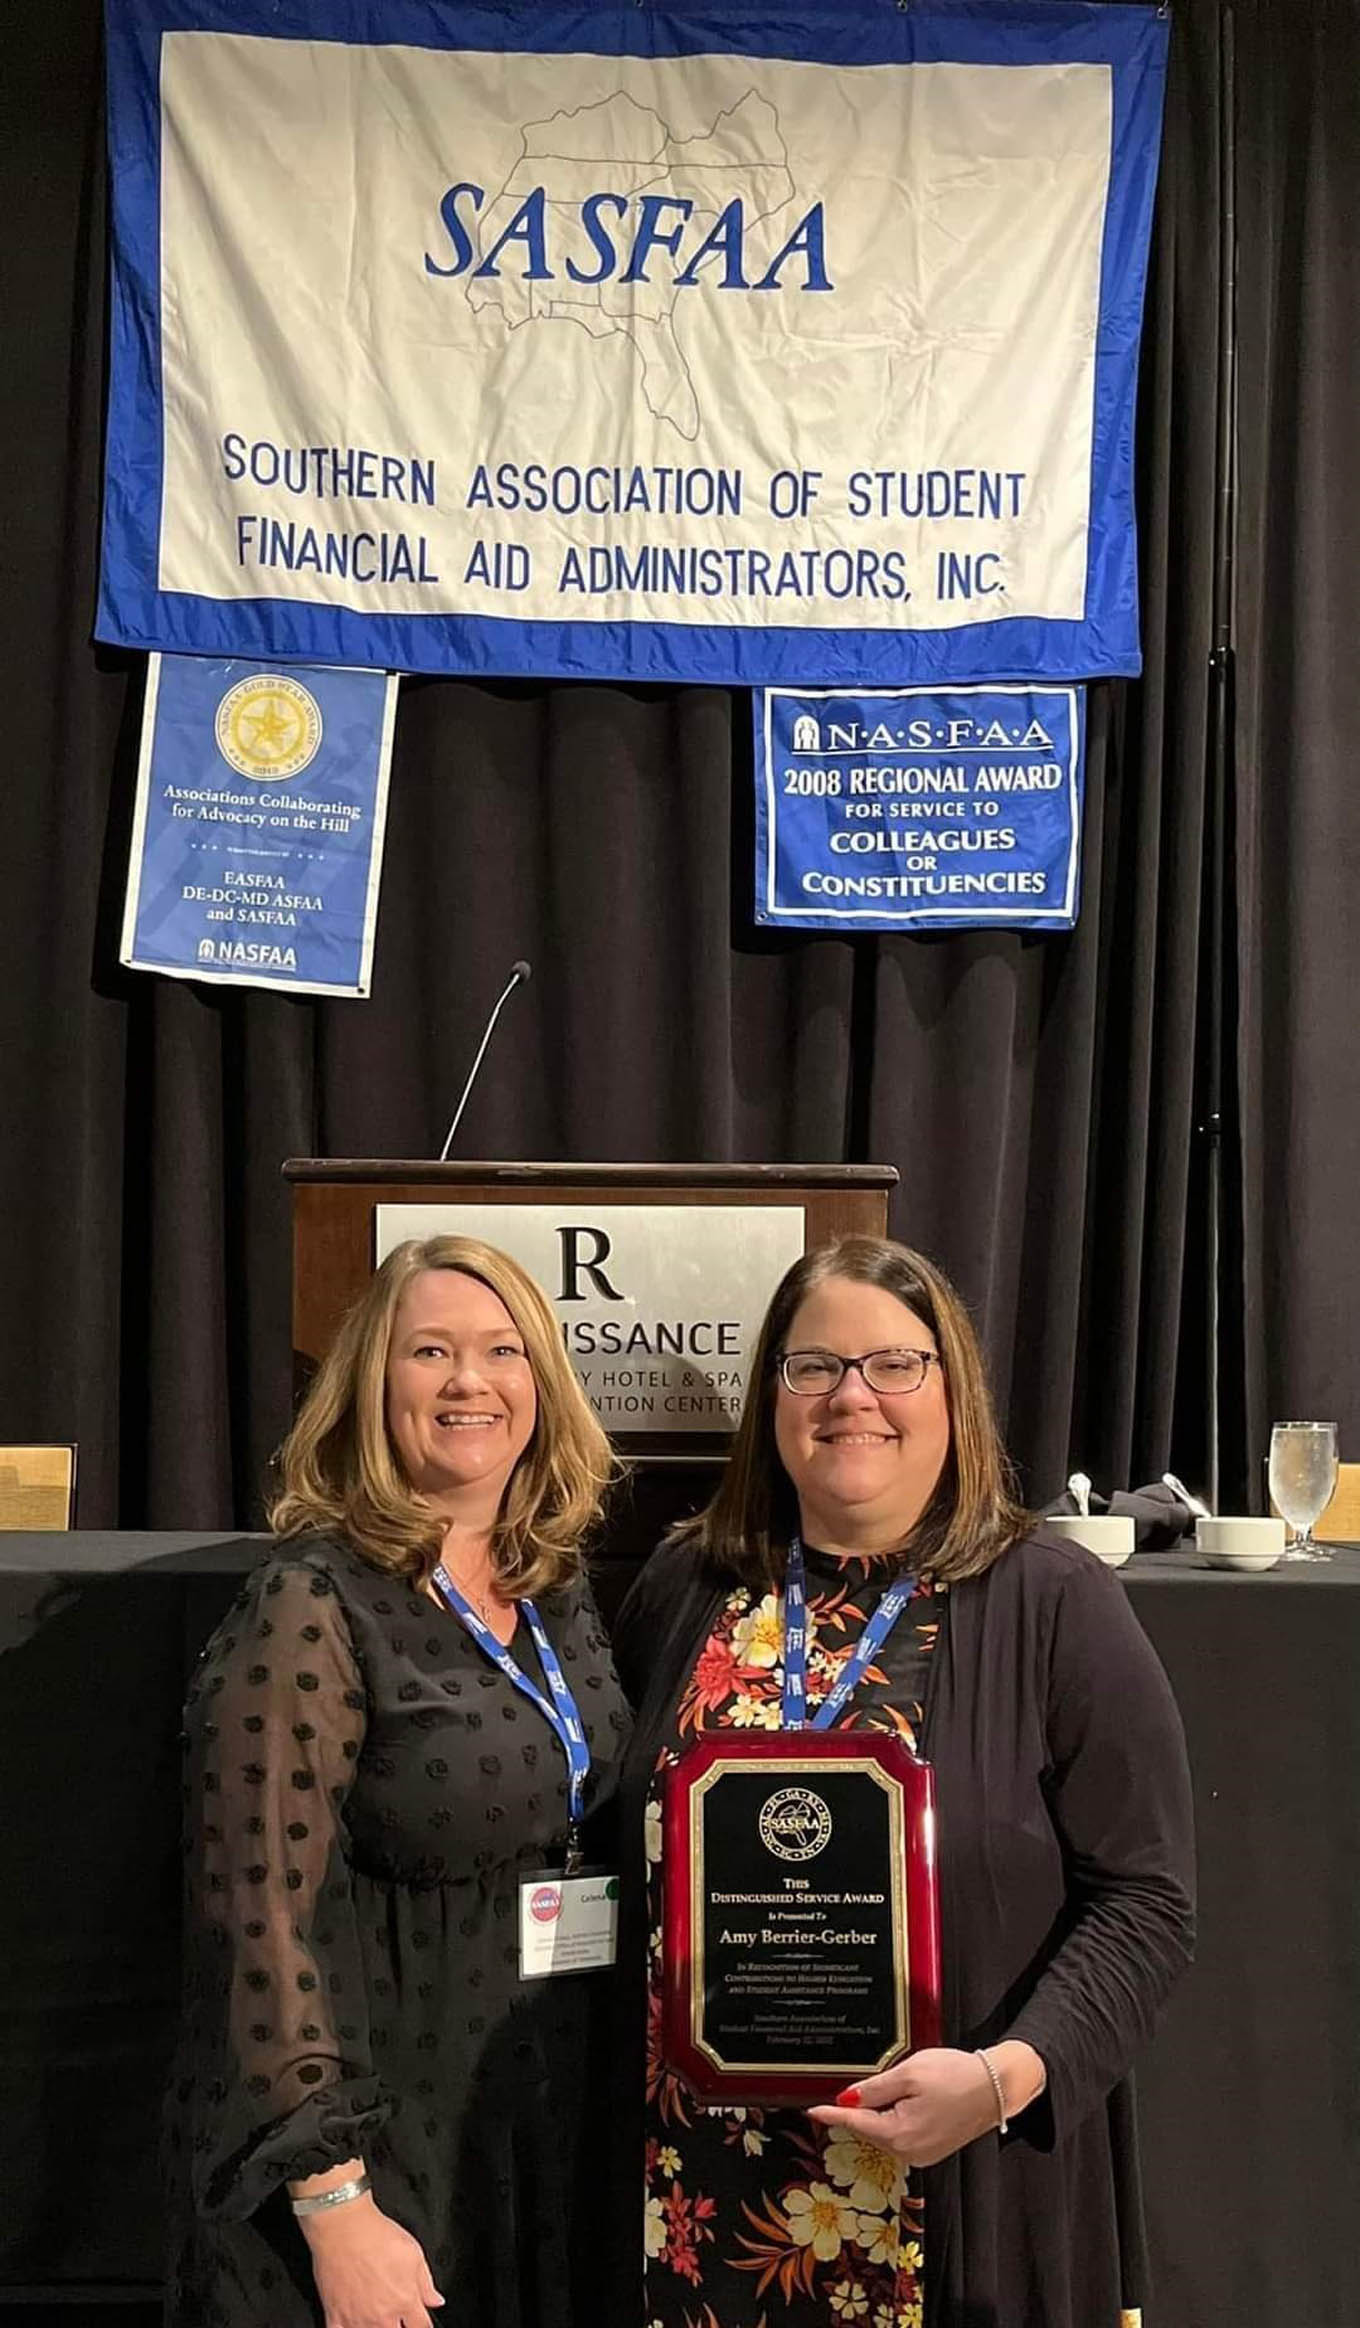 Read the full story, CCCC's Amy Berrier-Gerber receives SASFAA Distinguished Service Award